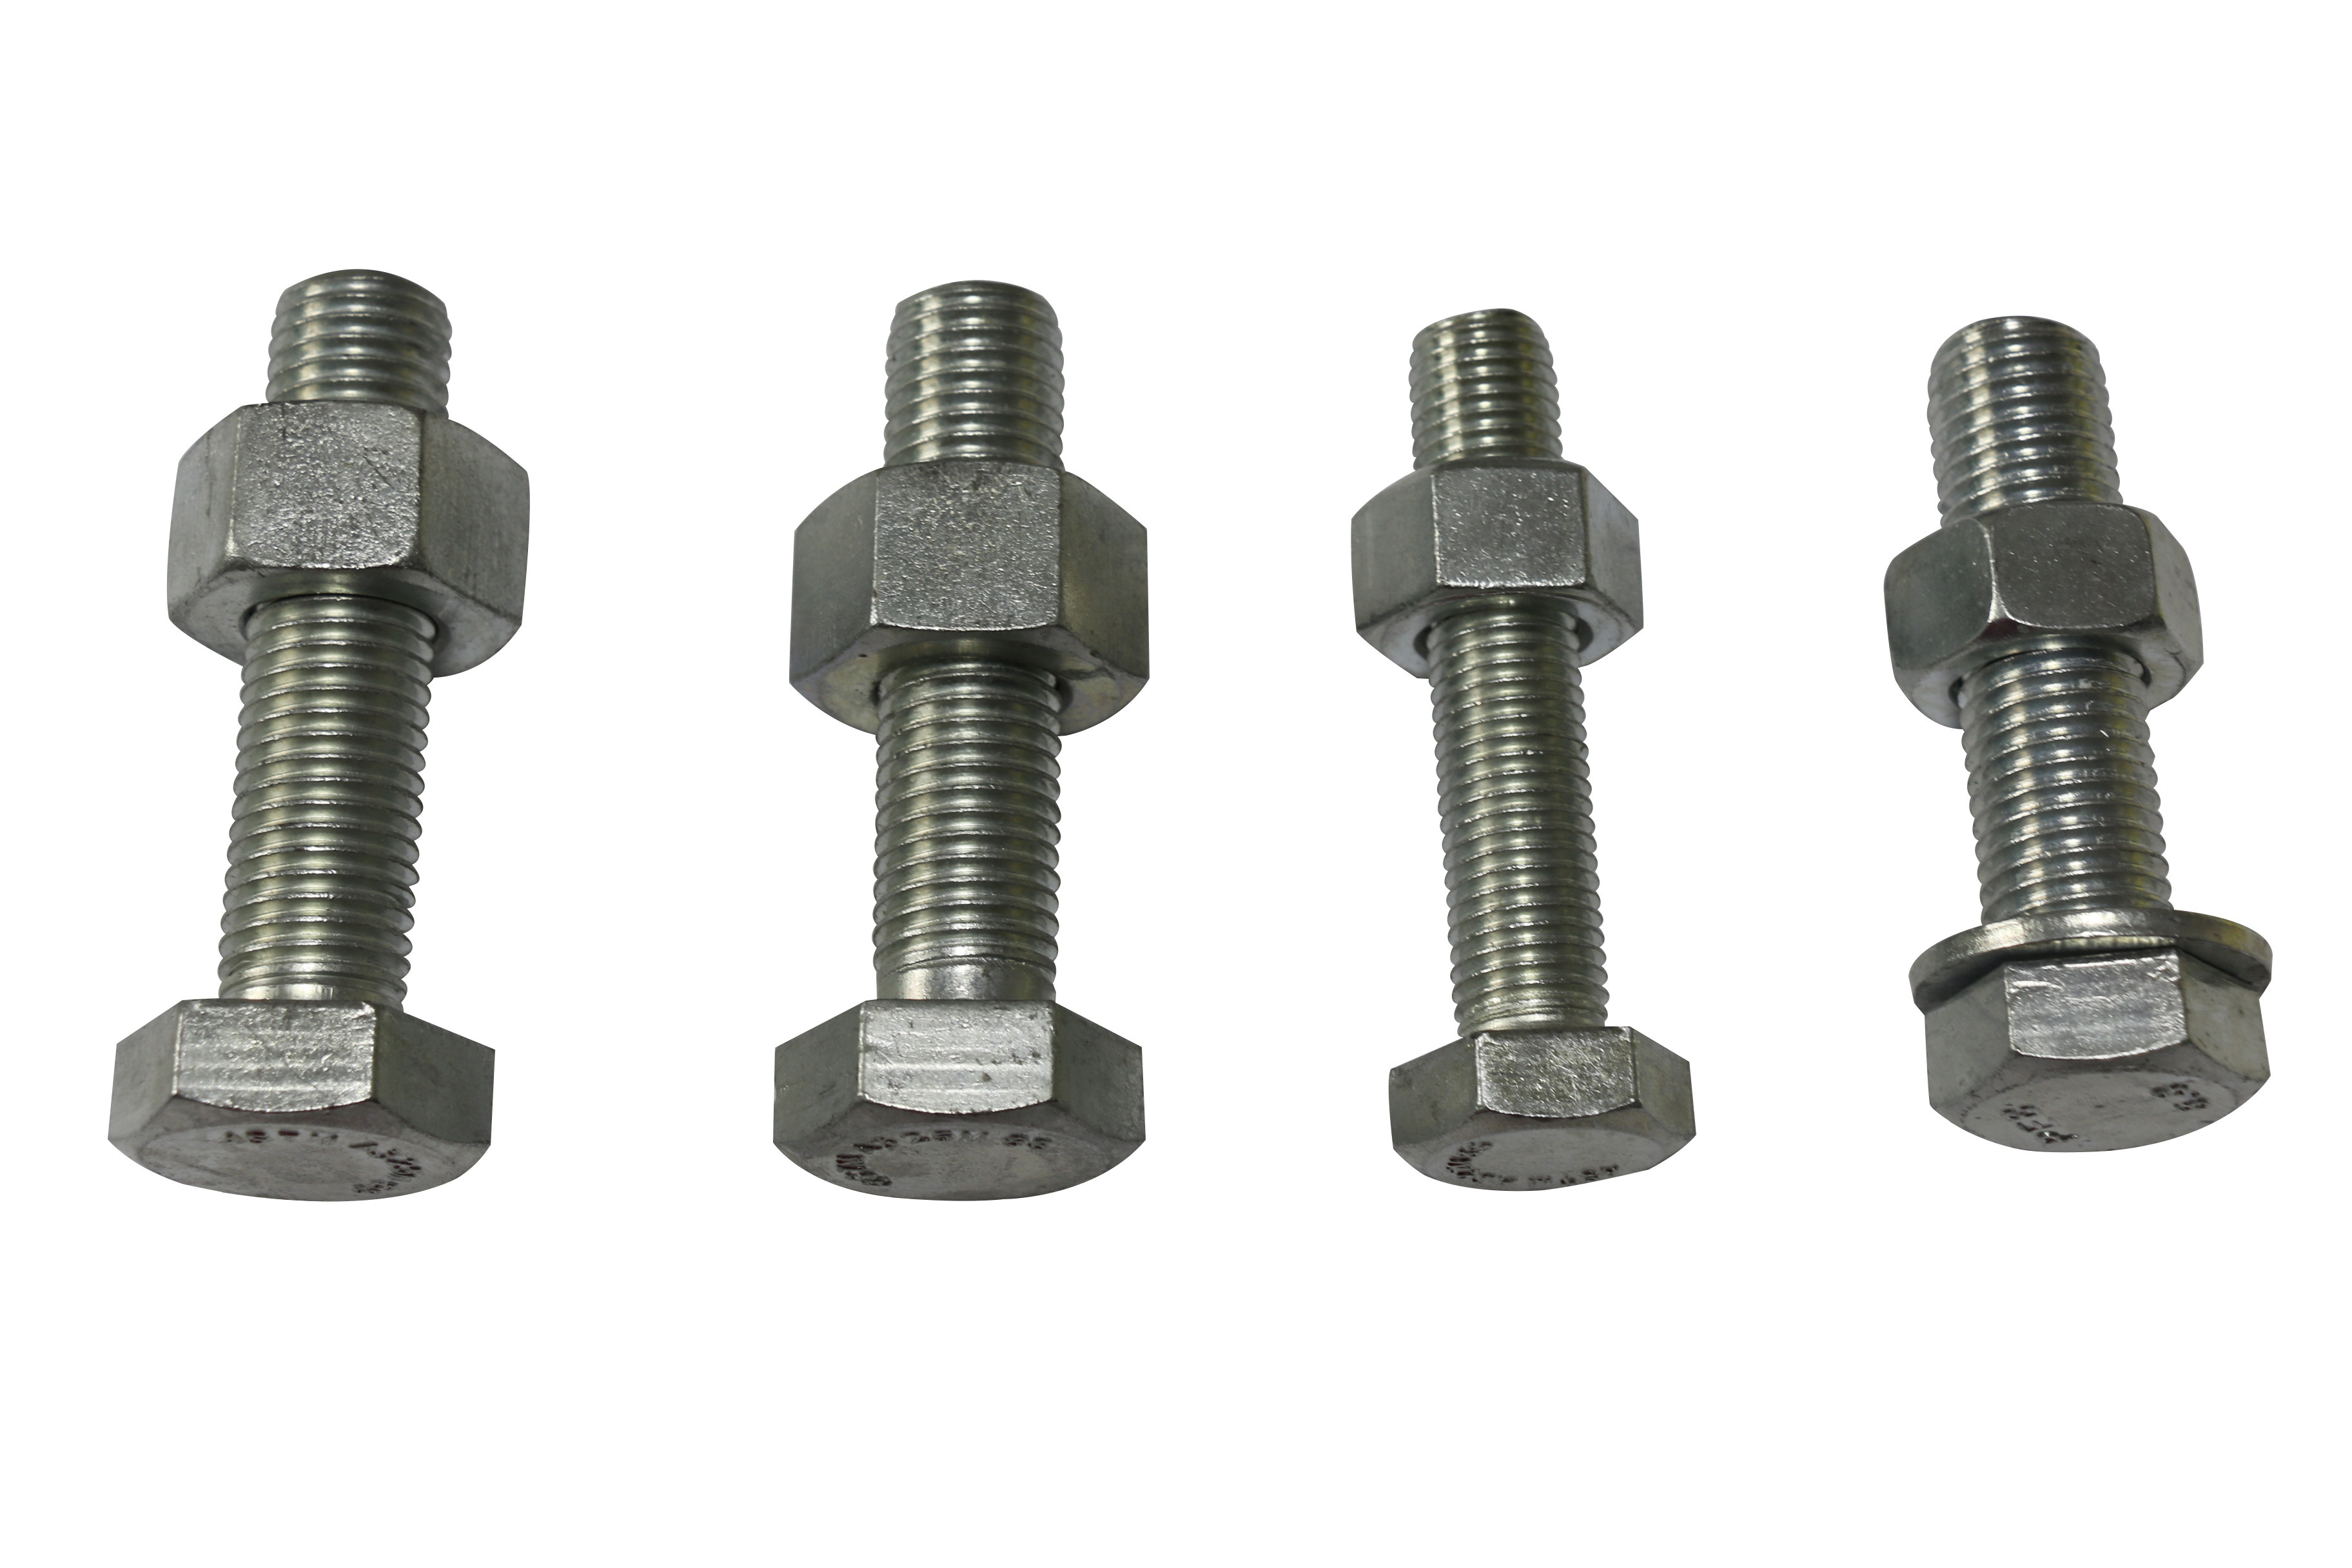 High Strength Bolts and Nuts